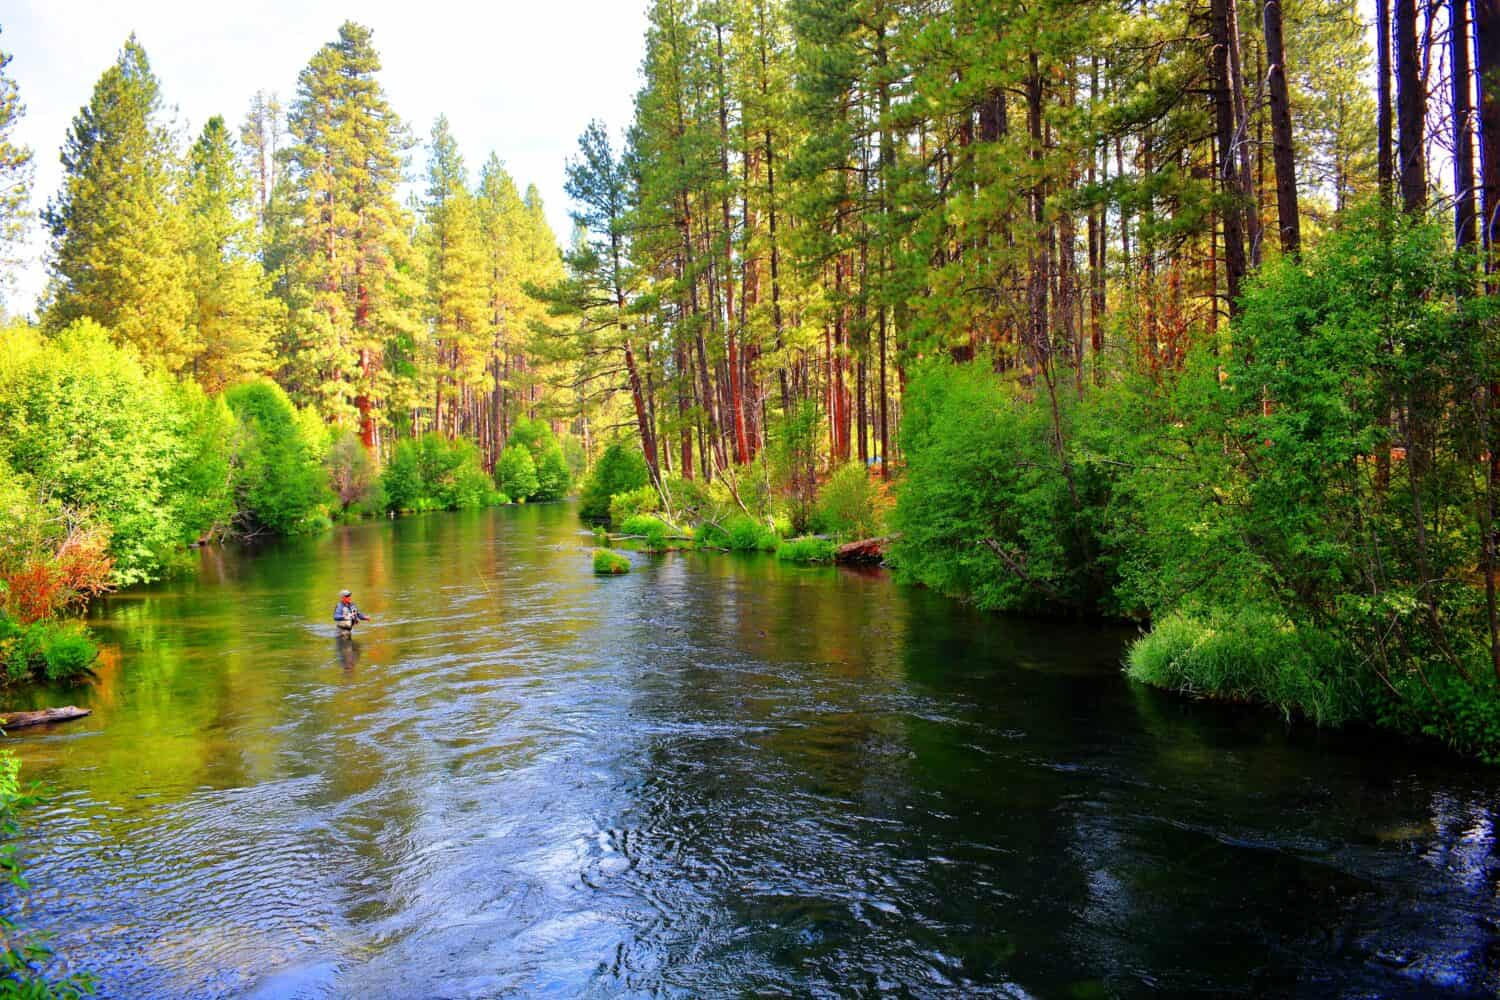 Fly fishing in the Metolius River